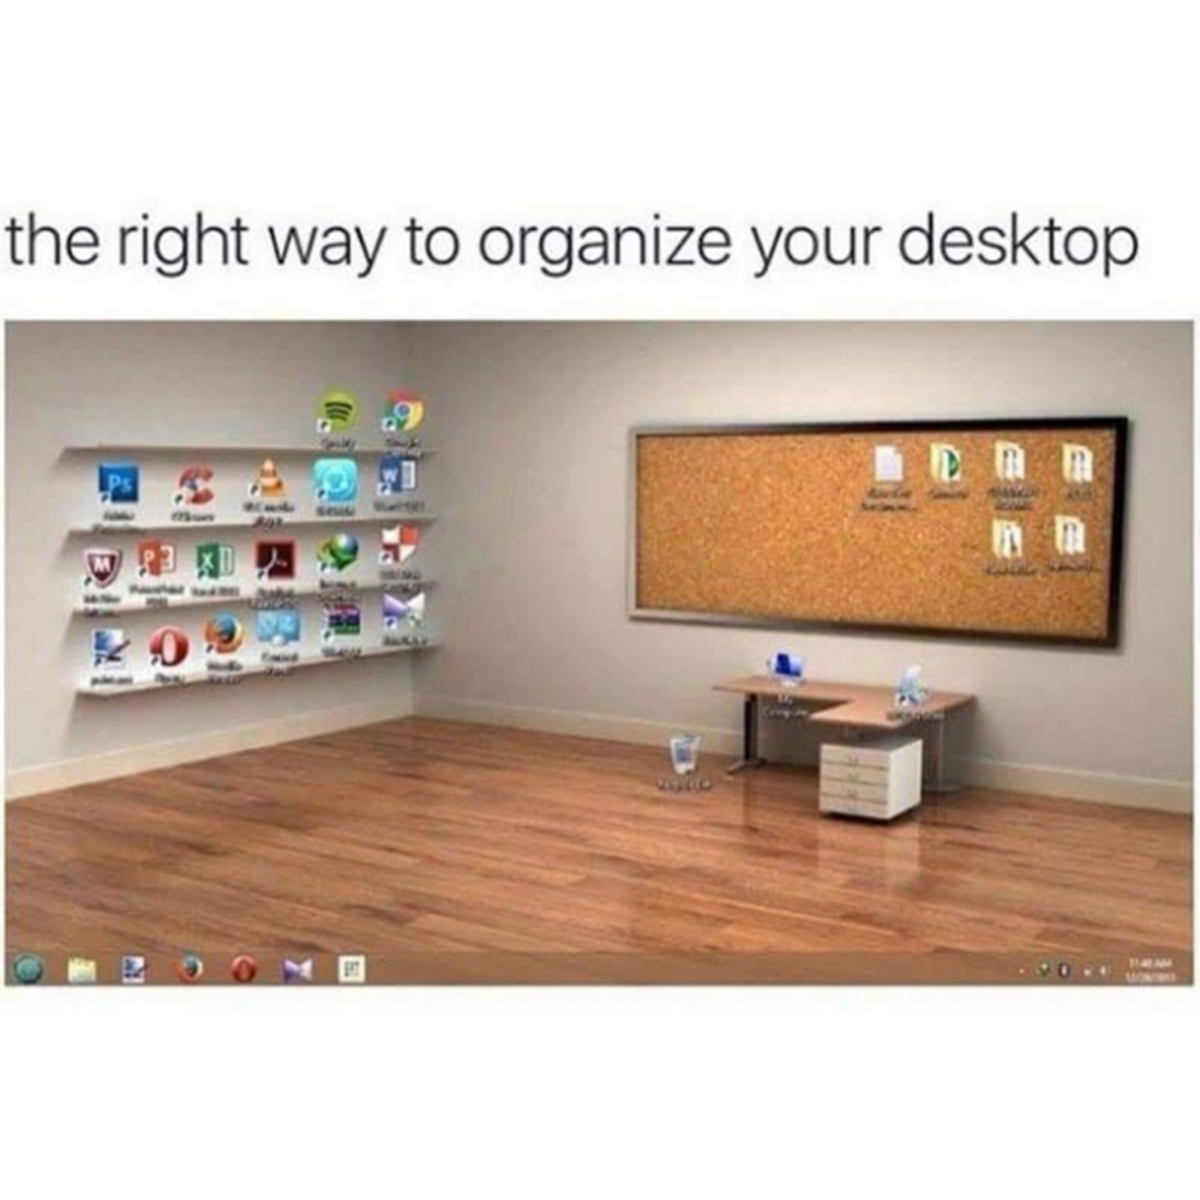 organised desktop - O the right way to organize your desktop